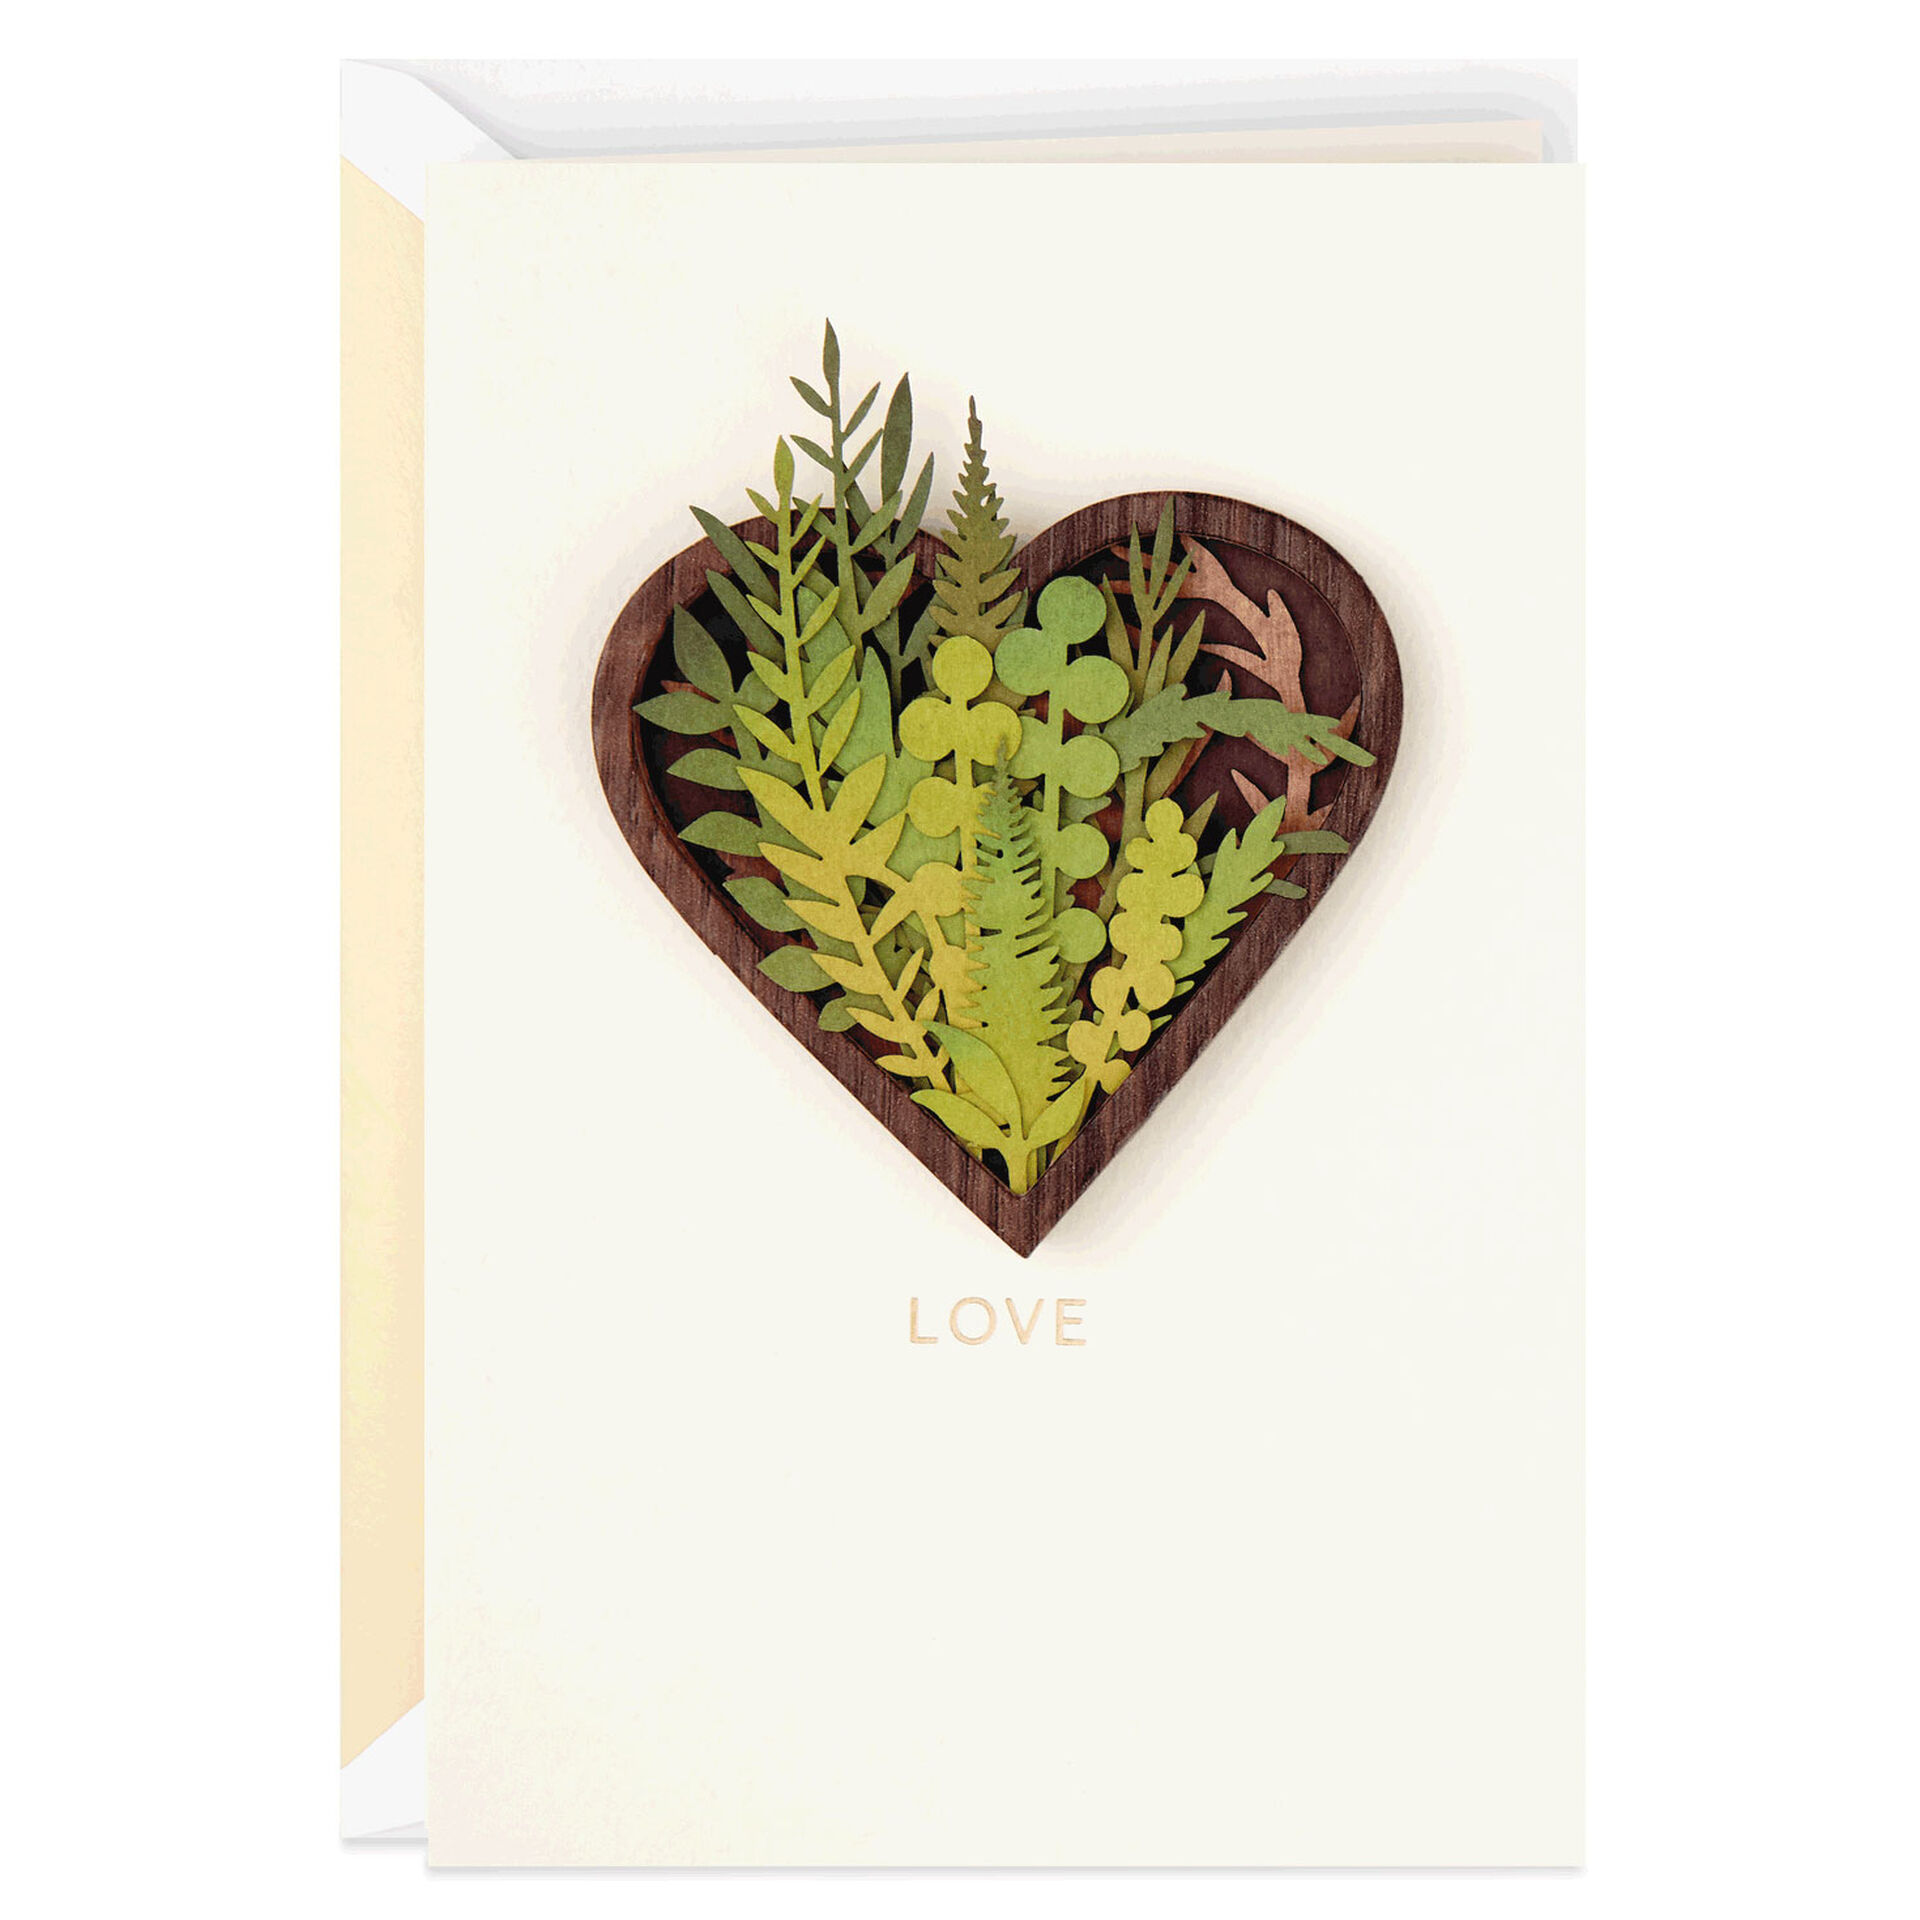 HeartShaped-Planter-With-Vines-Anniversary-Card_899LAD9585_01